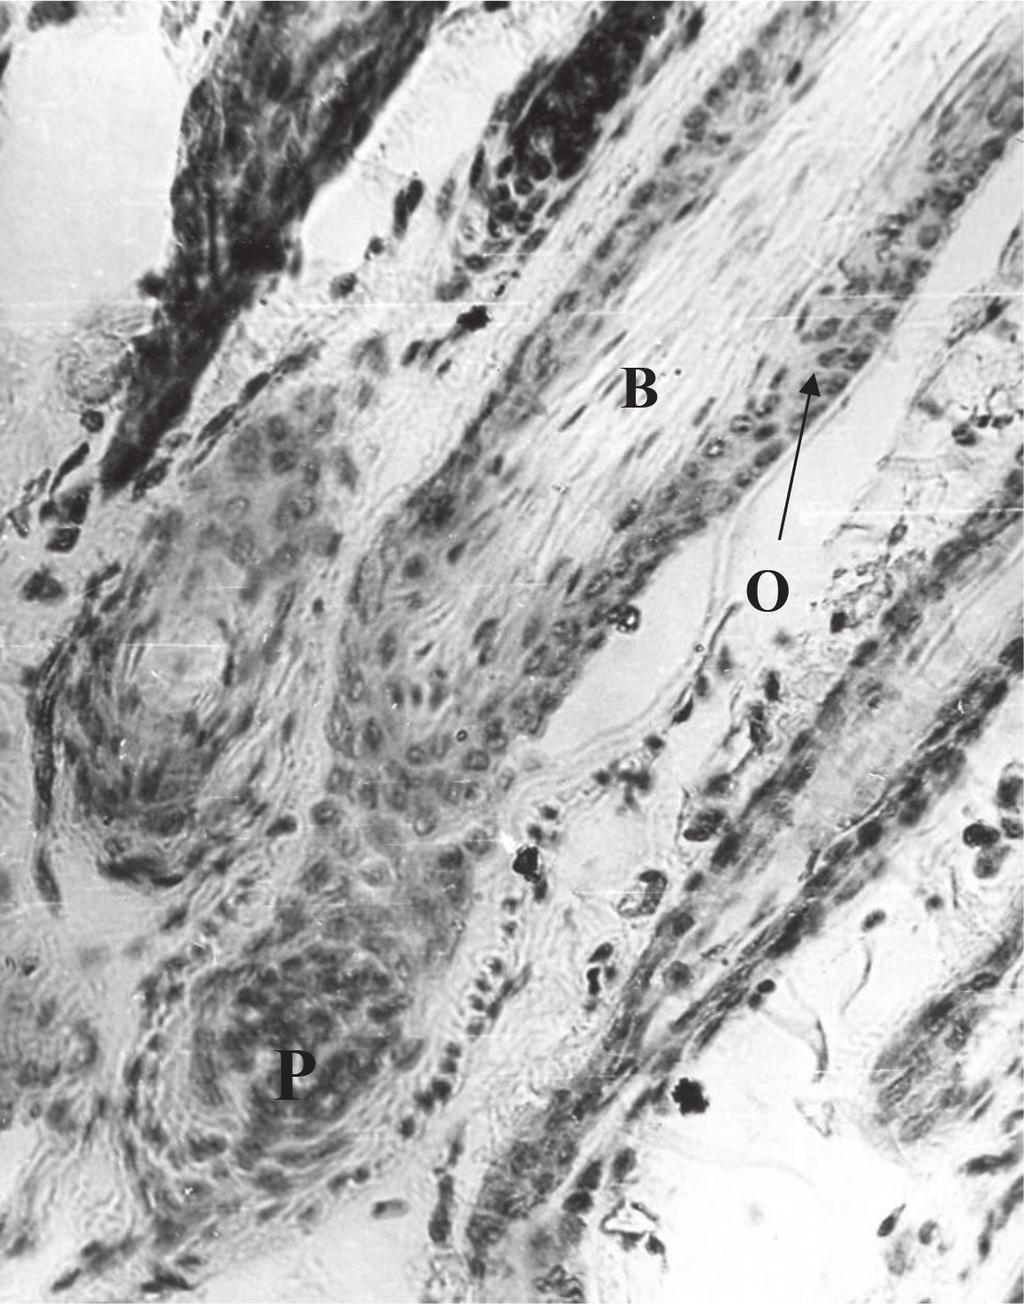 The Histological Mechanisms of Hair Loss http://dx.doi.org/10.5772/67275 75 growth for approximately 2 weeks. The transition from anagen VI to telogen occurs through the phase named the catagen.